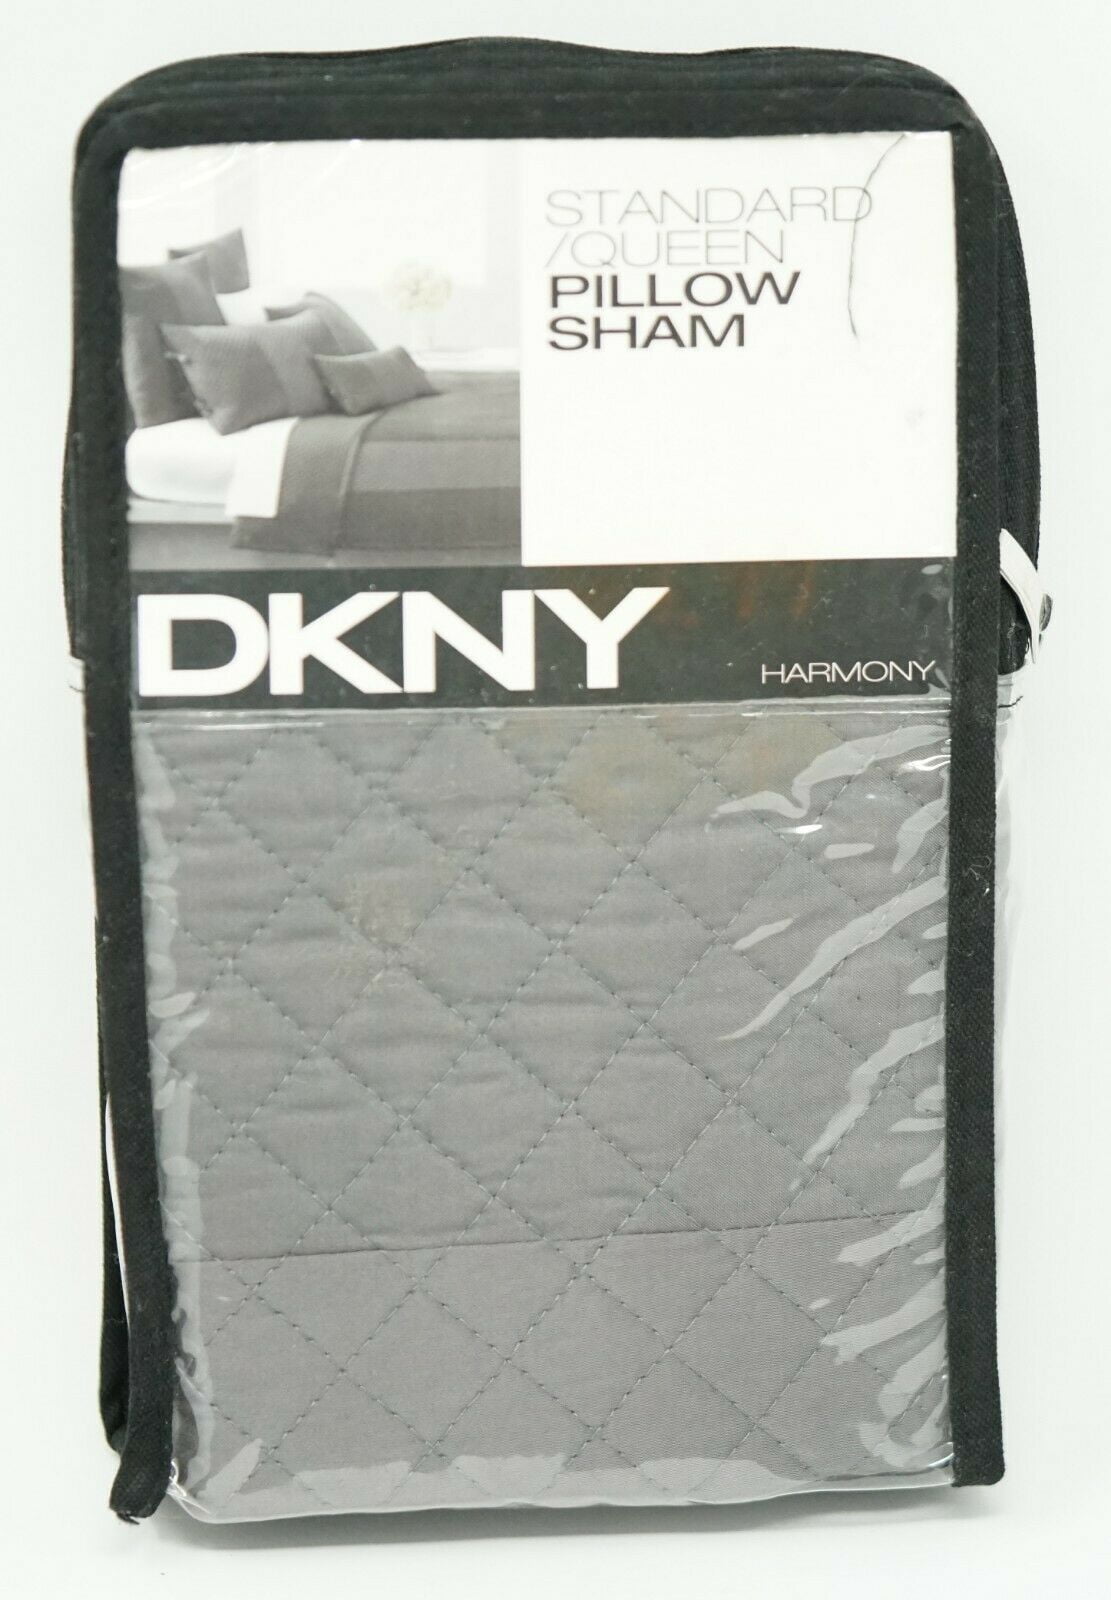 Details about   DKNY Harmony Standard/Queen Pillow Sham in Sand 